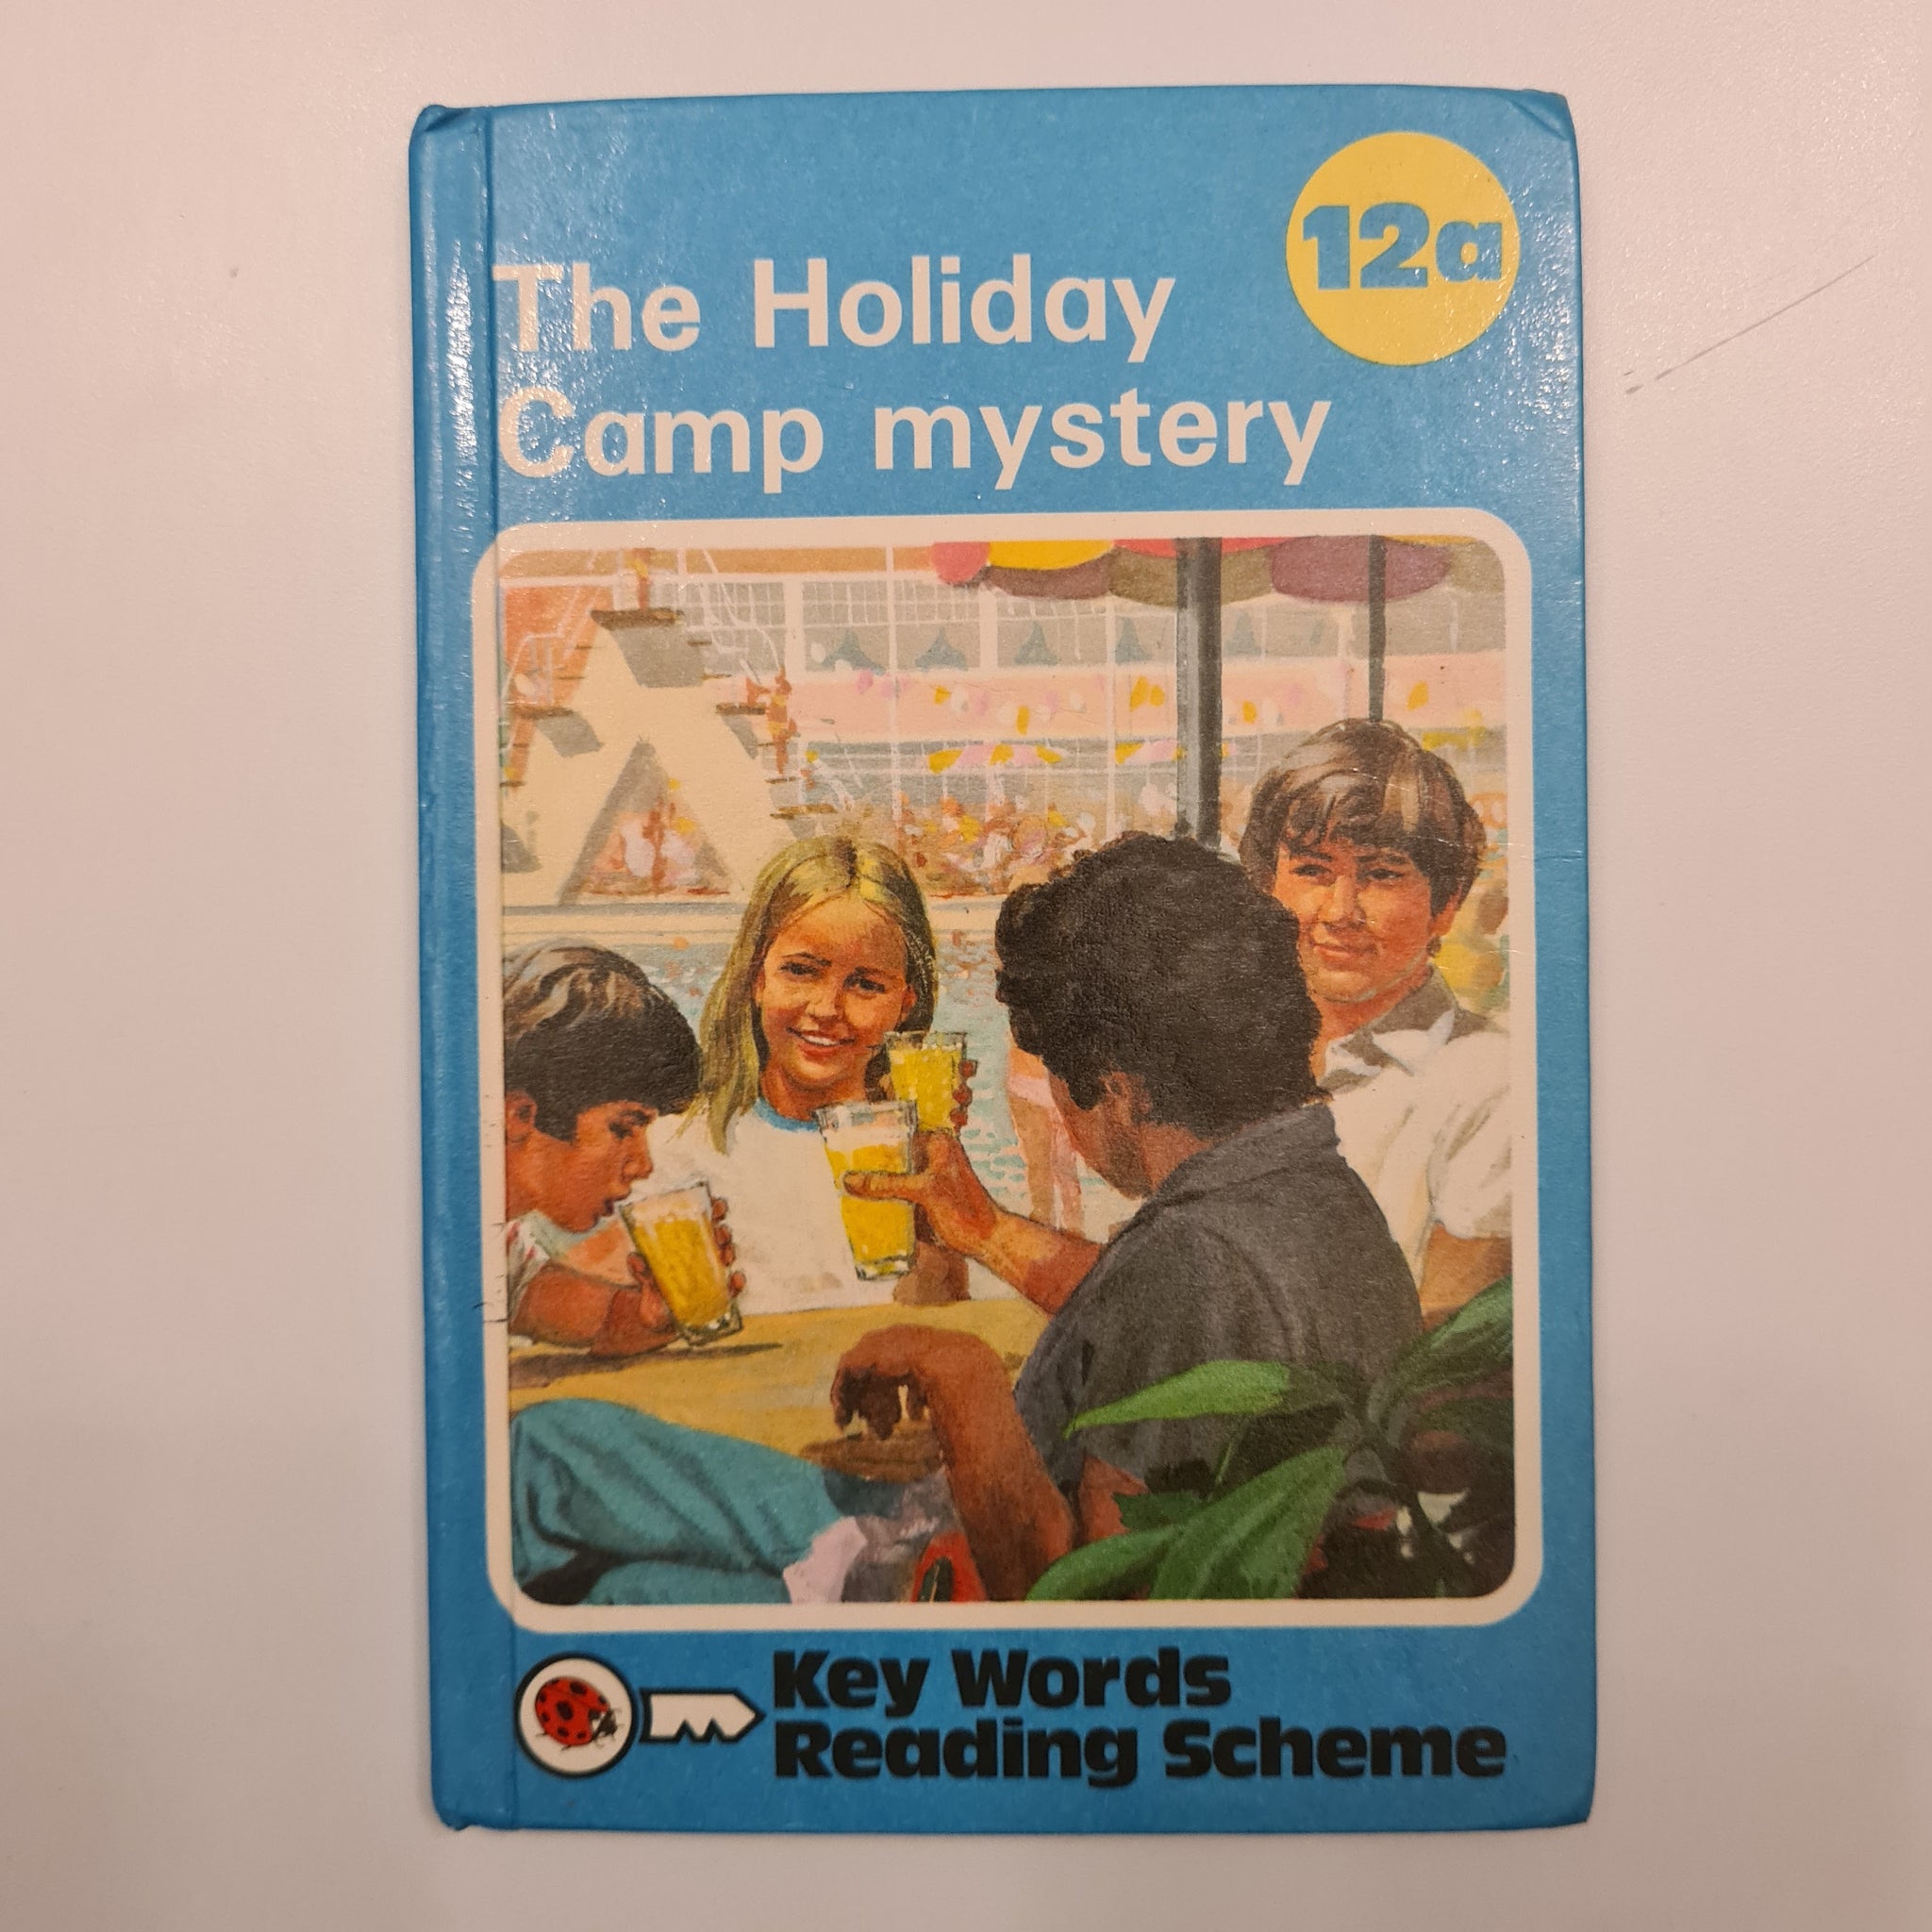 THE HOLIDAY CAMP MYSTERY 12a